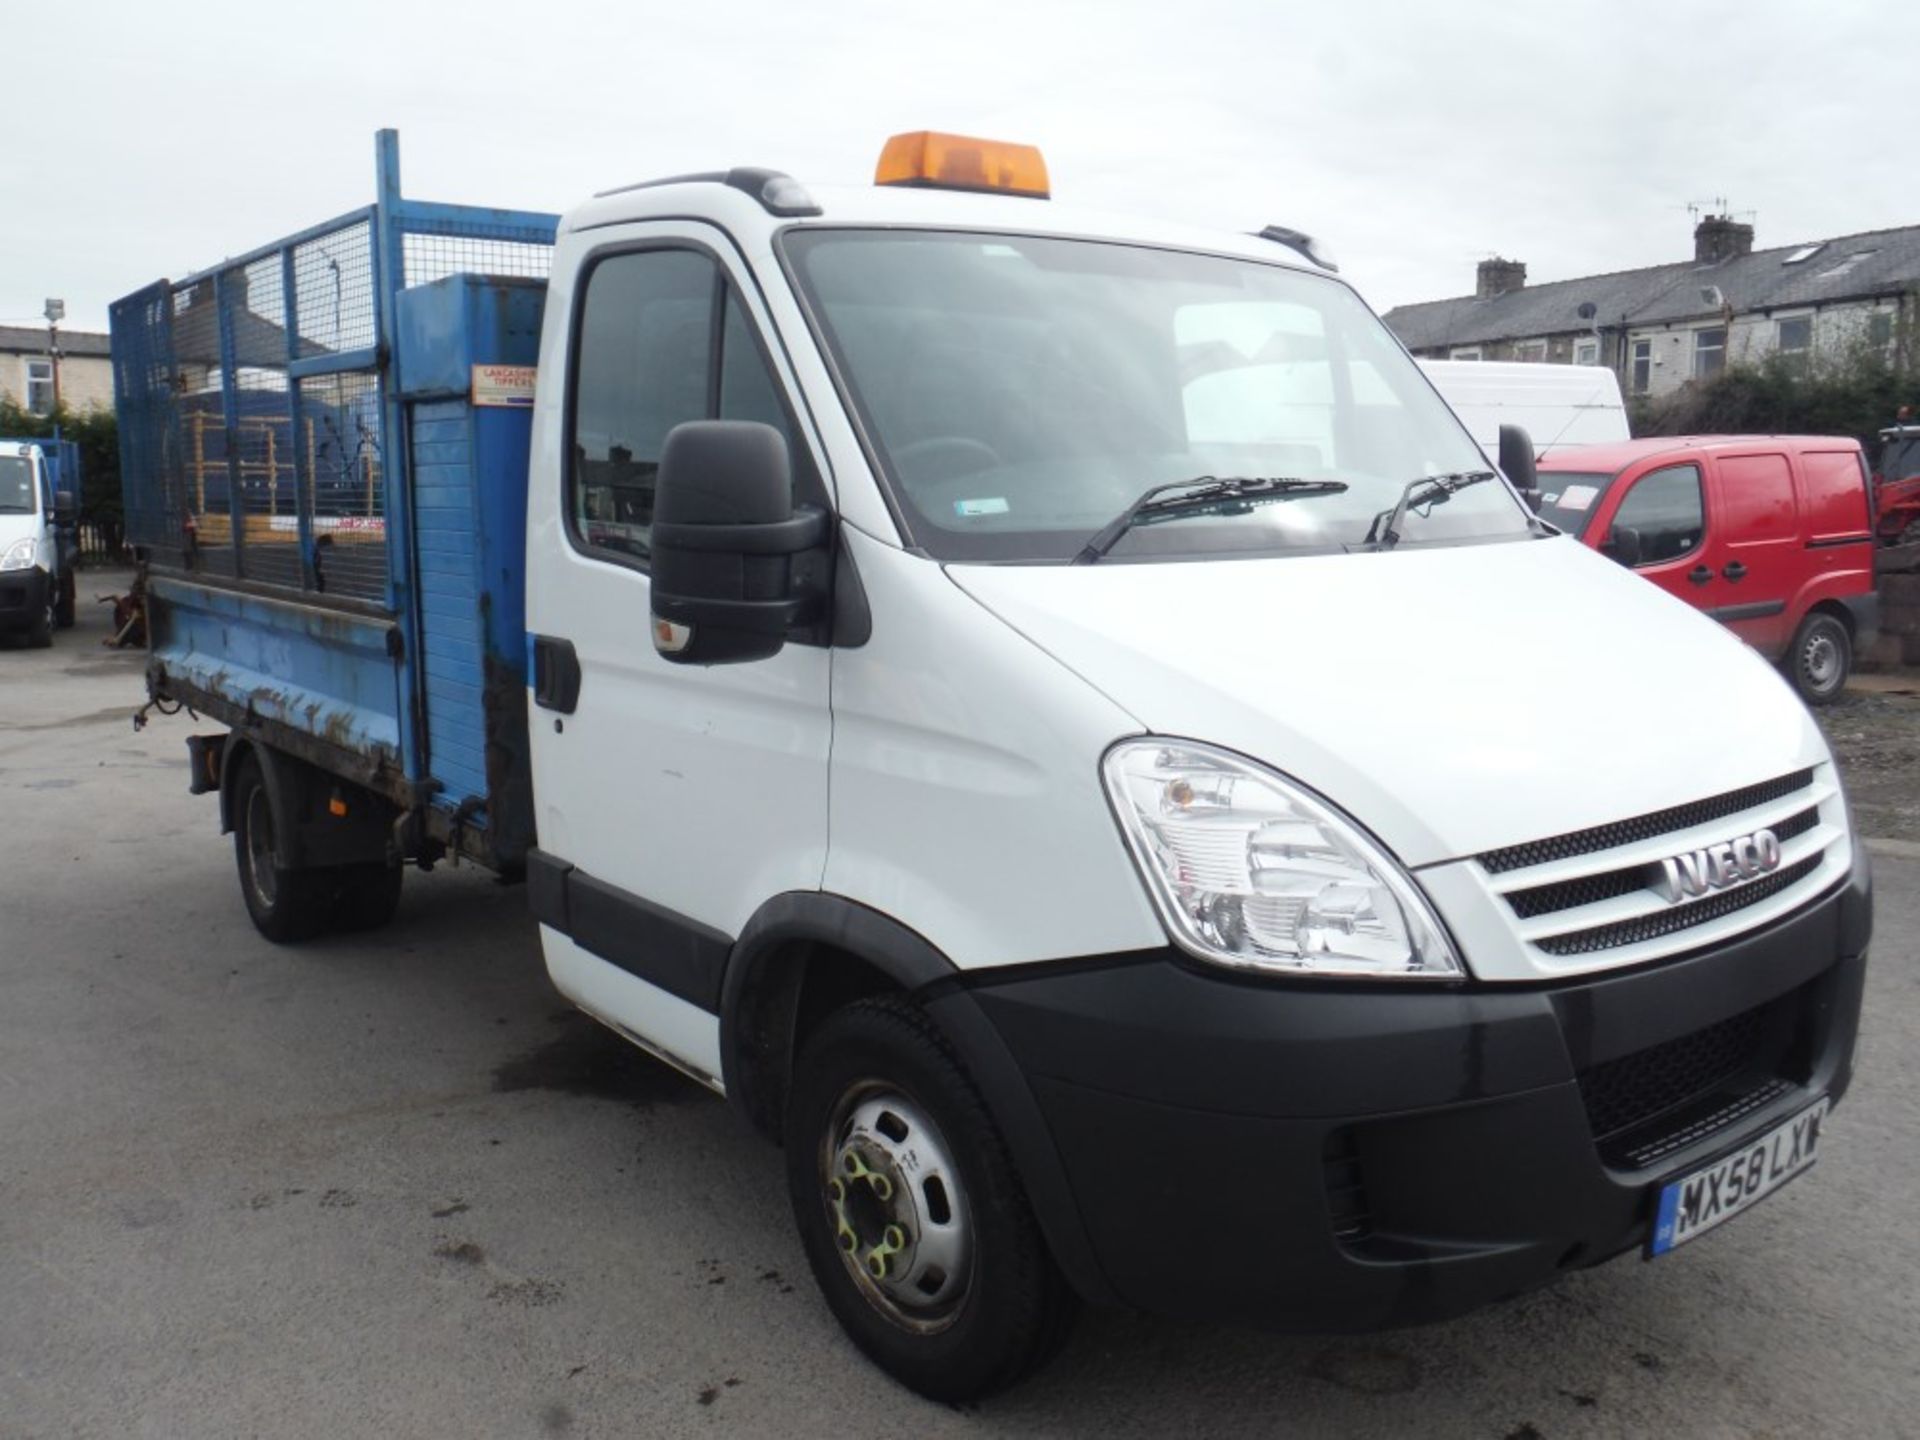 58 reg IVECO DAILY 50C15 CAGED TIPPER, 1ST REG 10/08, TEST 06/15, 141129M, V5 HERE, 1 OWNER FROM NEW